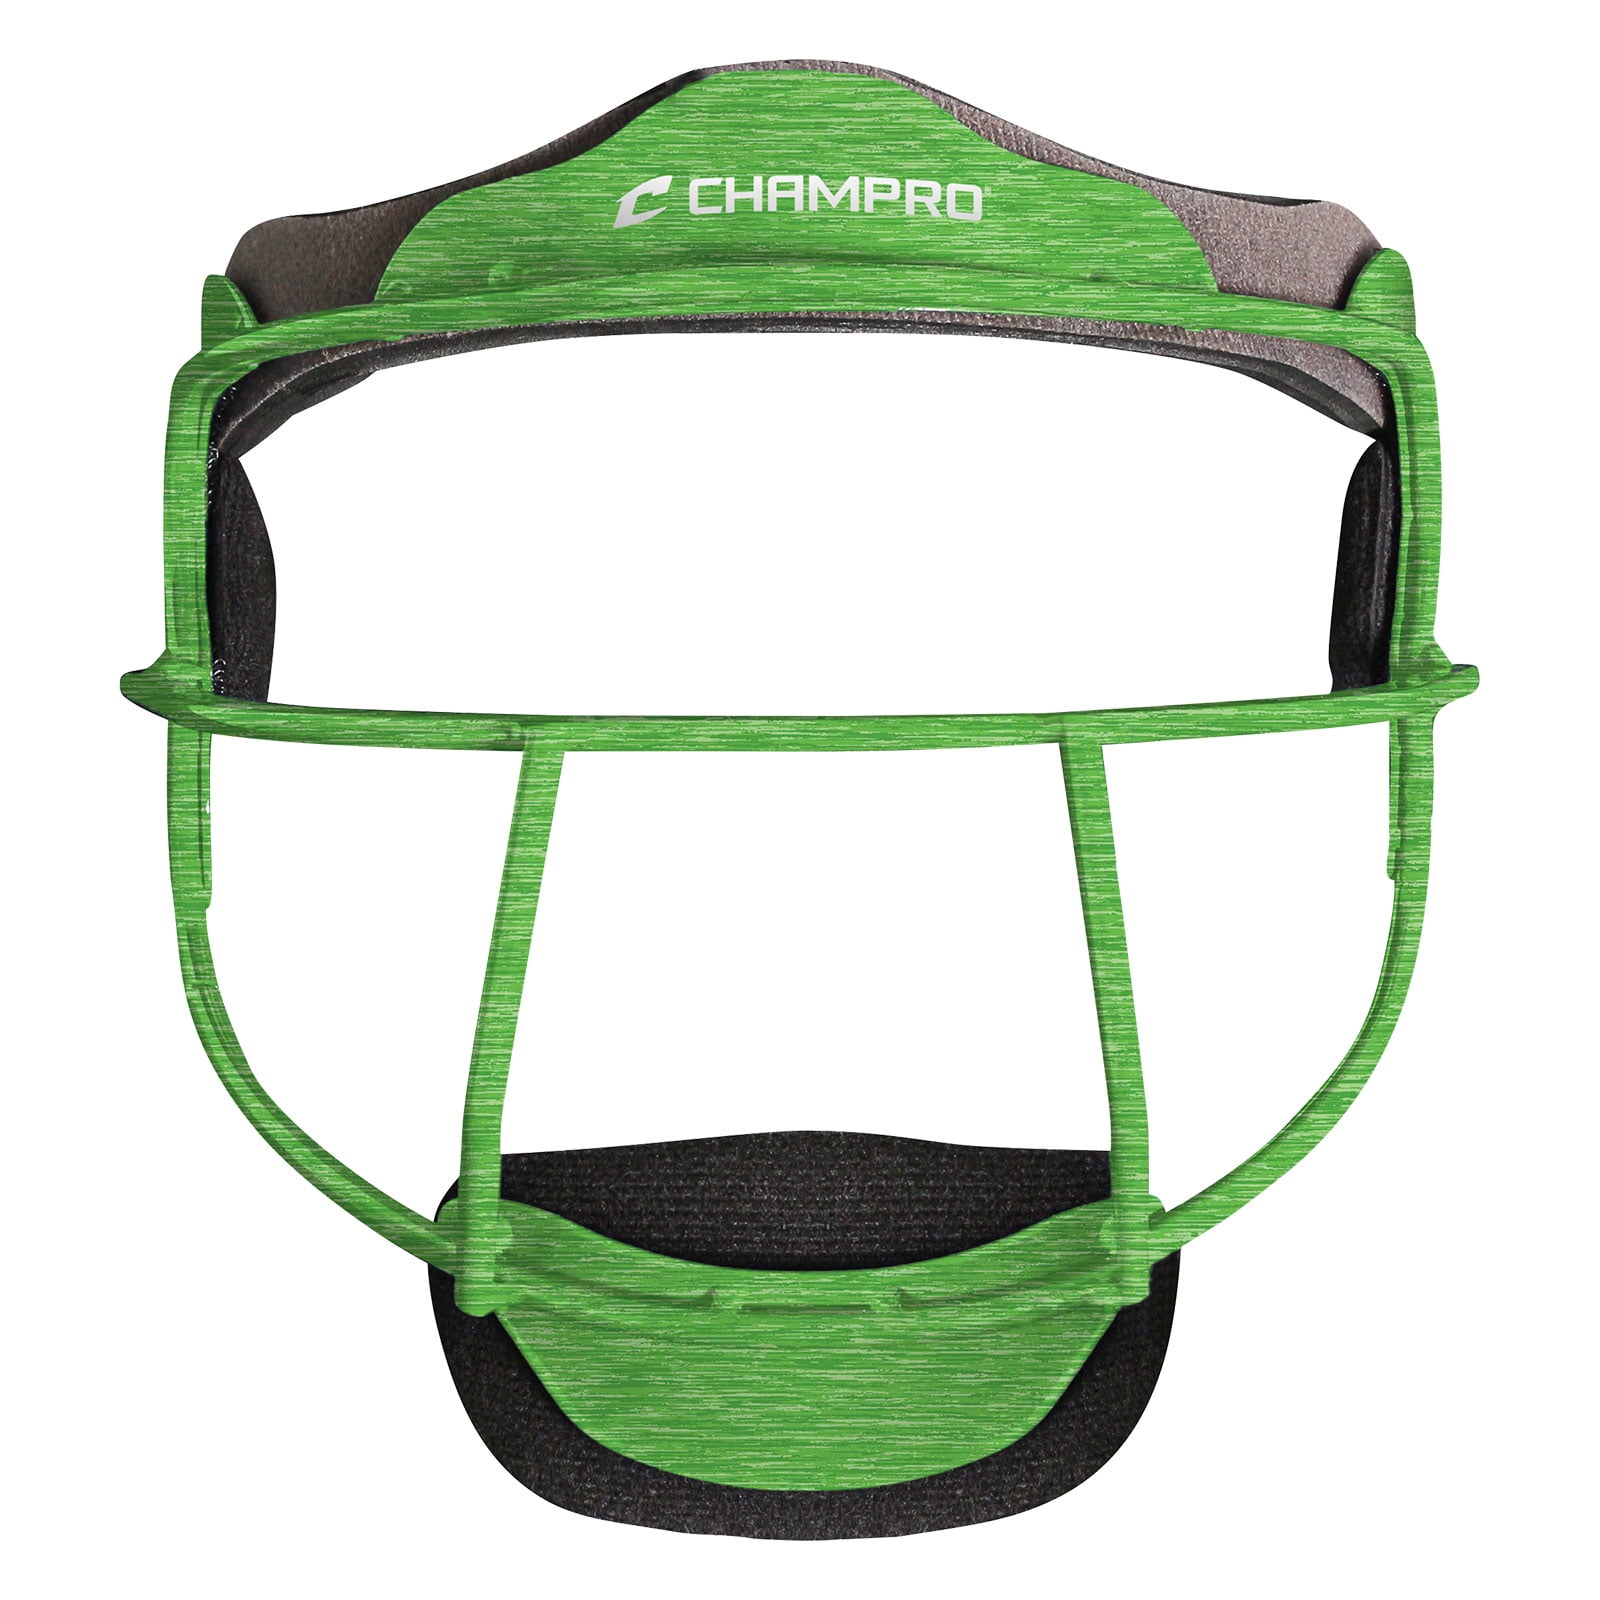 Pony Tail or T-Harness, 11 Colors Girls Softball Game Face Steel Safety Mask 